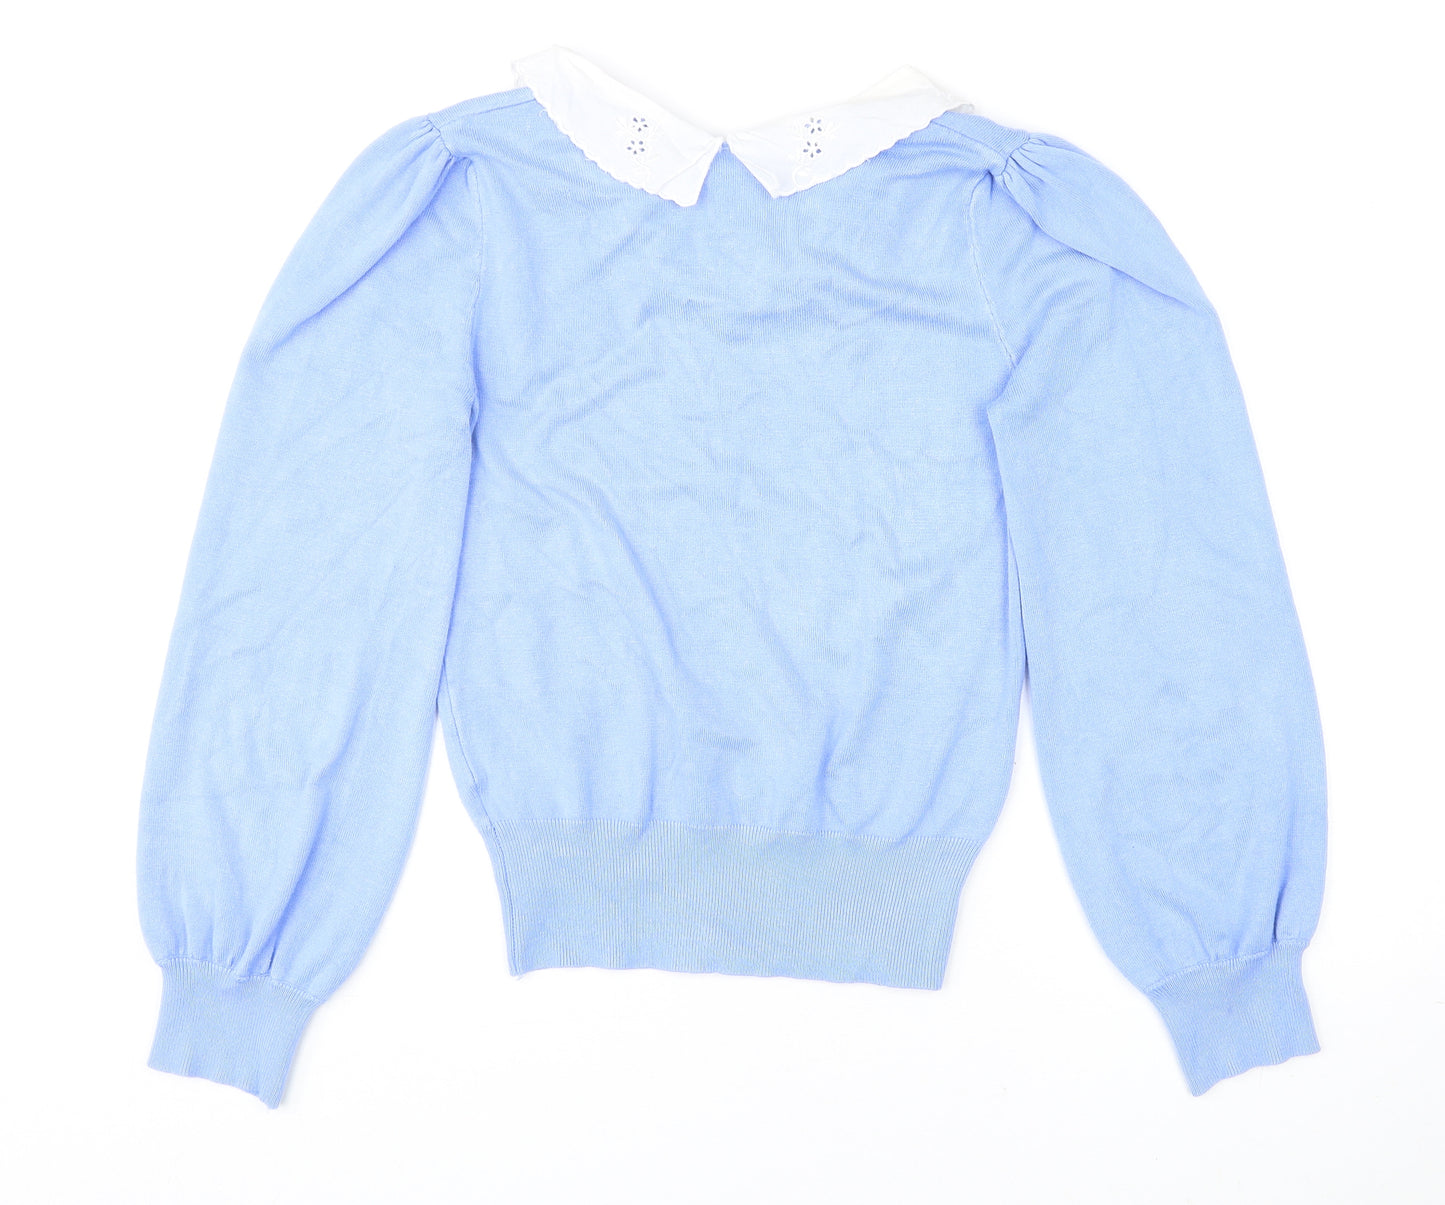 New Look Womens Blue Collared Viscose Pullover Jumper Size 8 Pullover - Lace